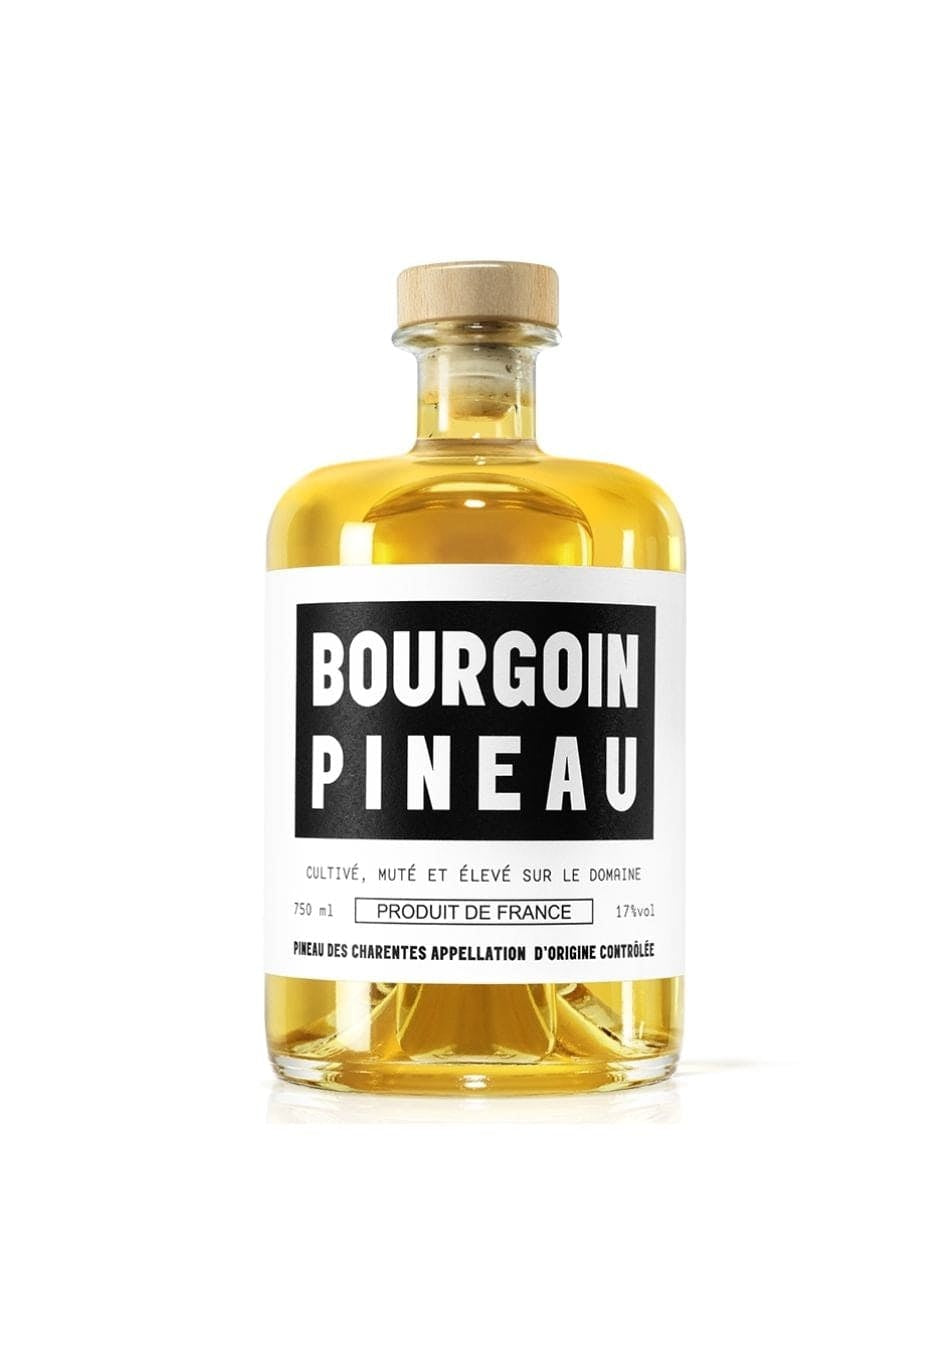 Shop Cognac Bourgoin Cognac Bourgoin | Pineau Bourgoin online at PENTICTON artisanal French wine store in Hong Kong. Discover other French wines, promotions, workshops and featured offers at pentictonpacific.com 